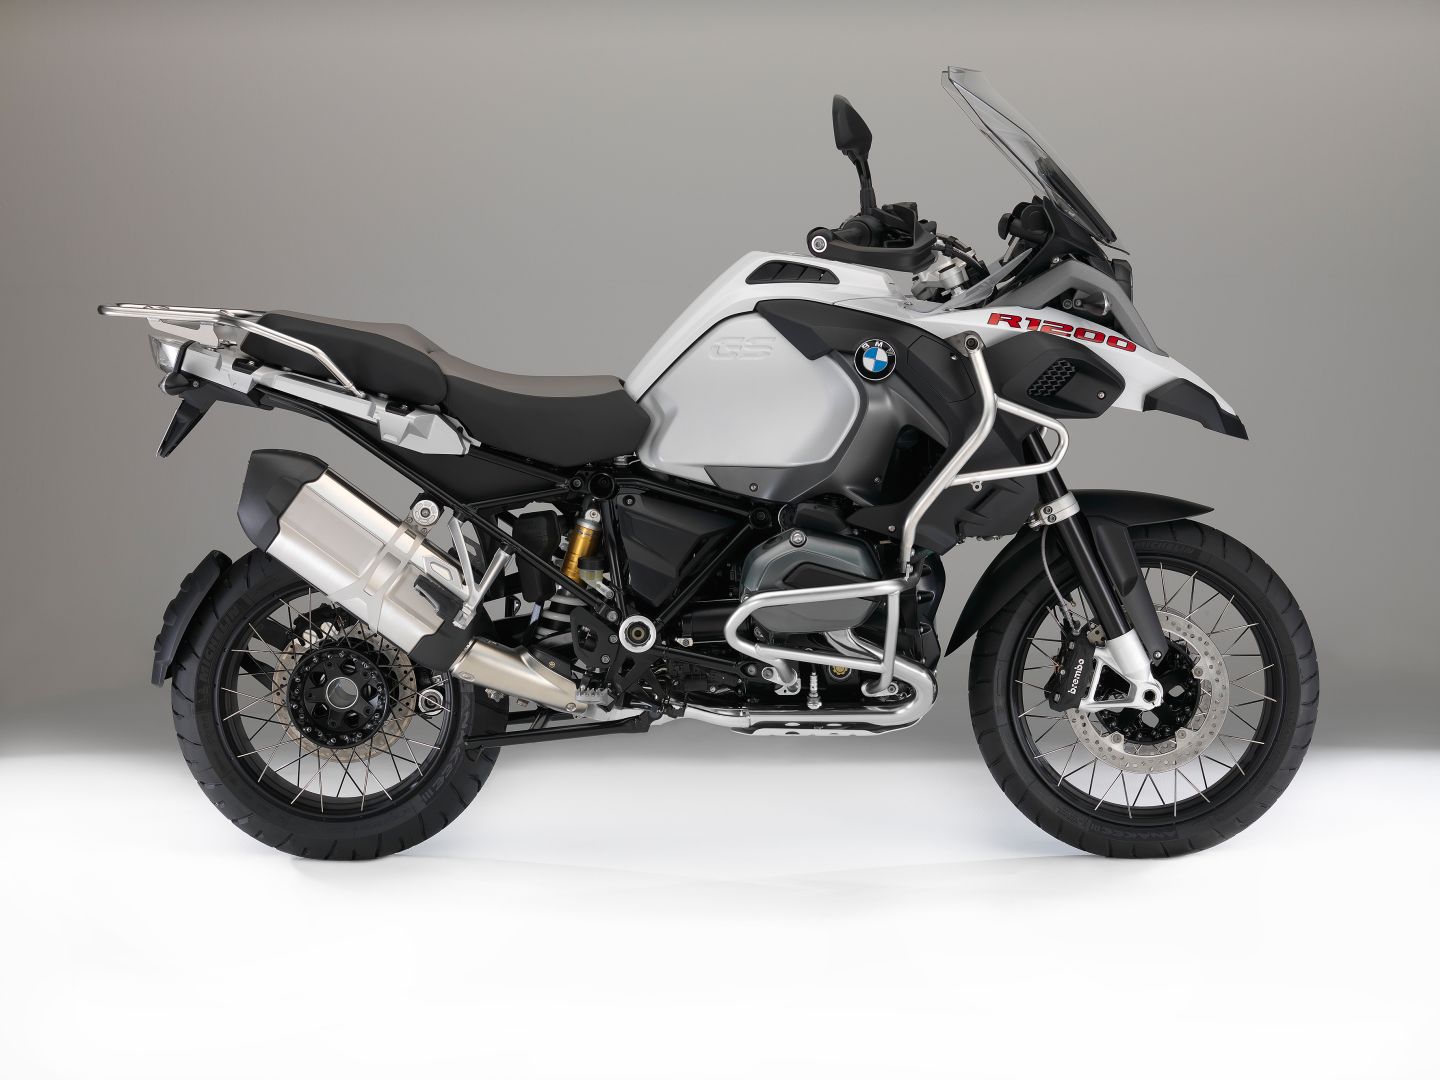 bmw-motorcycles-get-upgraded-colors-and-new-features-for-2016-photo-gallery_25.jpg